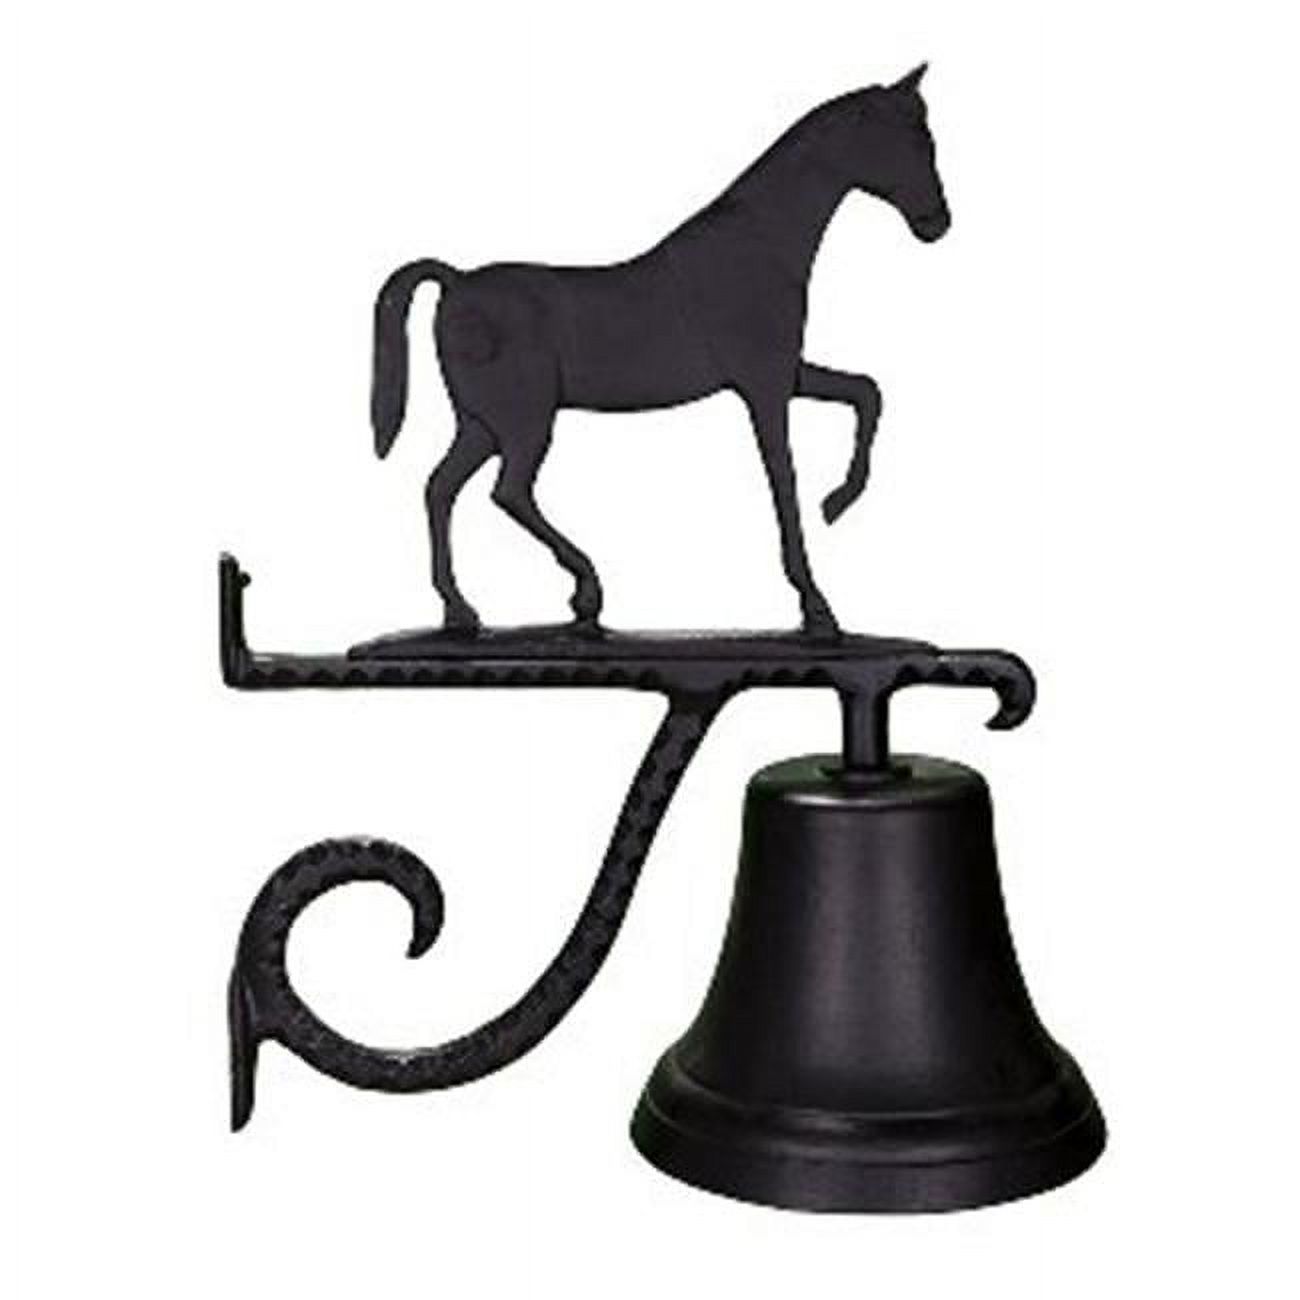 Montague Metal Products  Cast Bell With Satin Black Gaited Horse Ornament - image 1 of 1